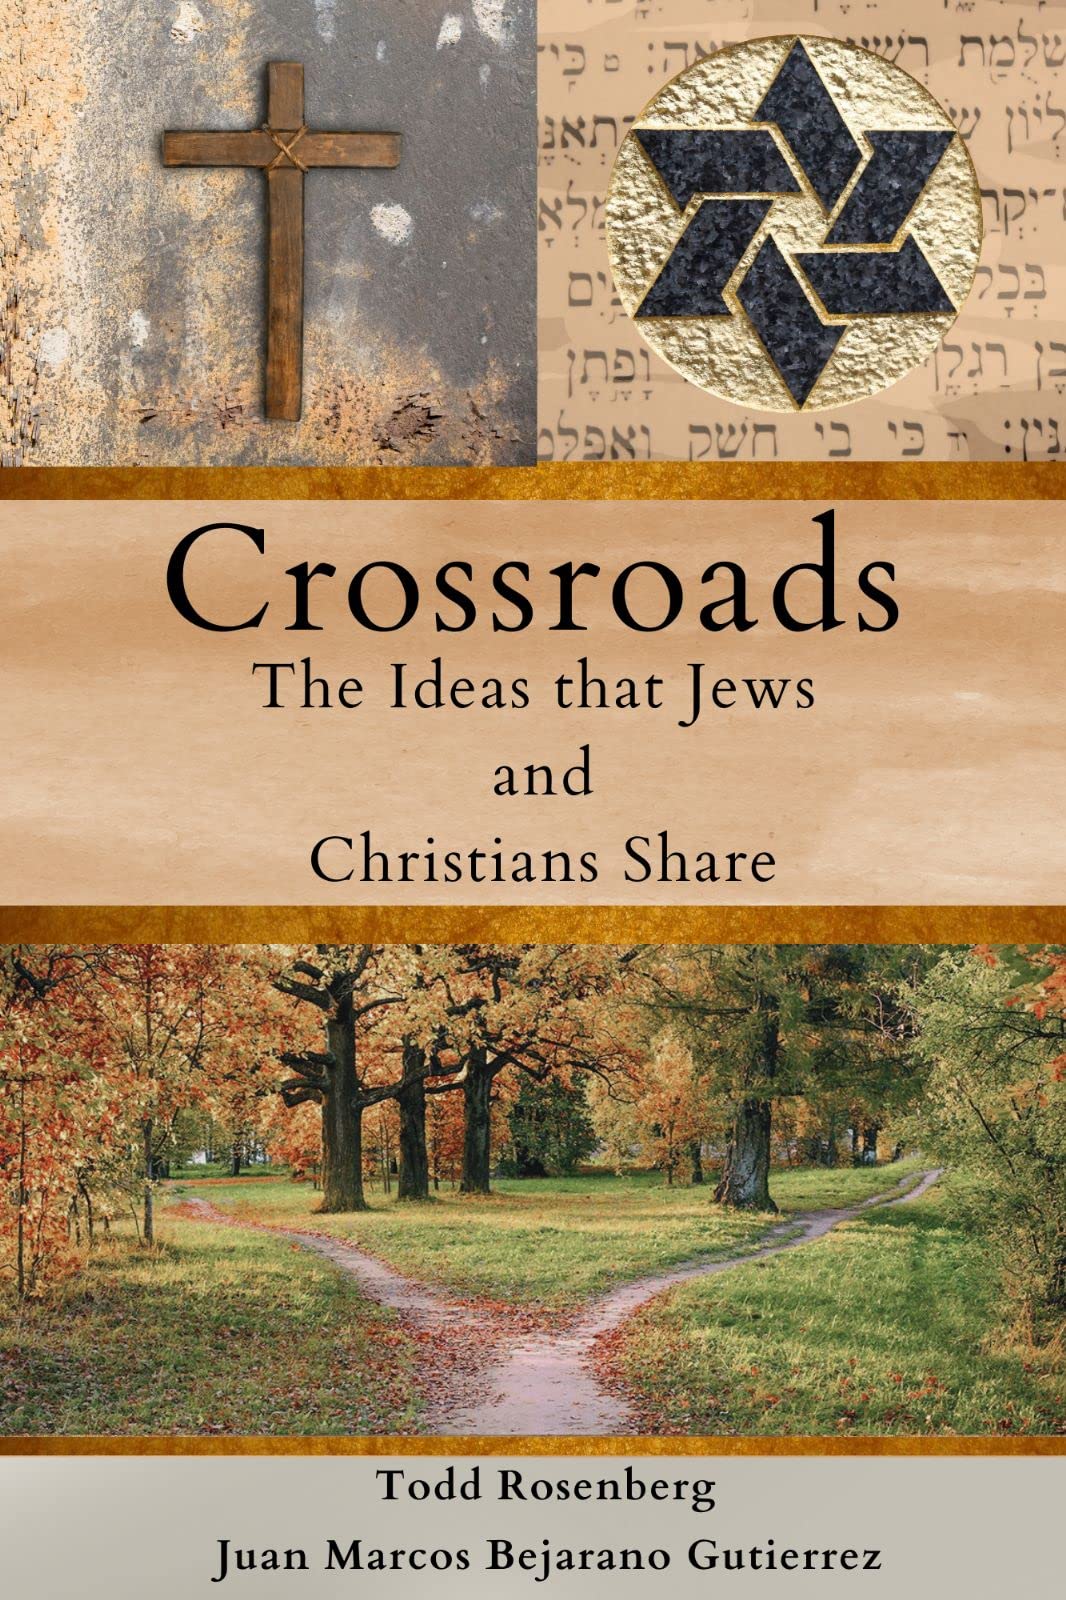 Crossroads: The ideas that Jews and Christians Share